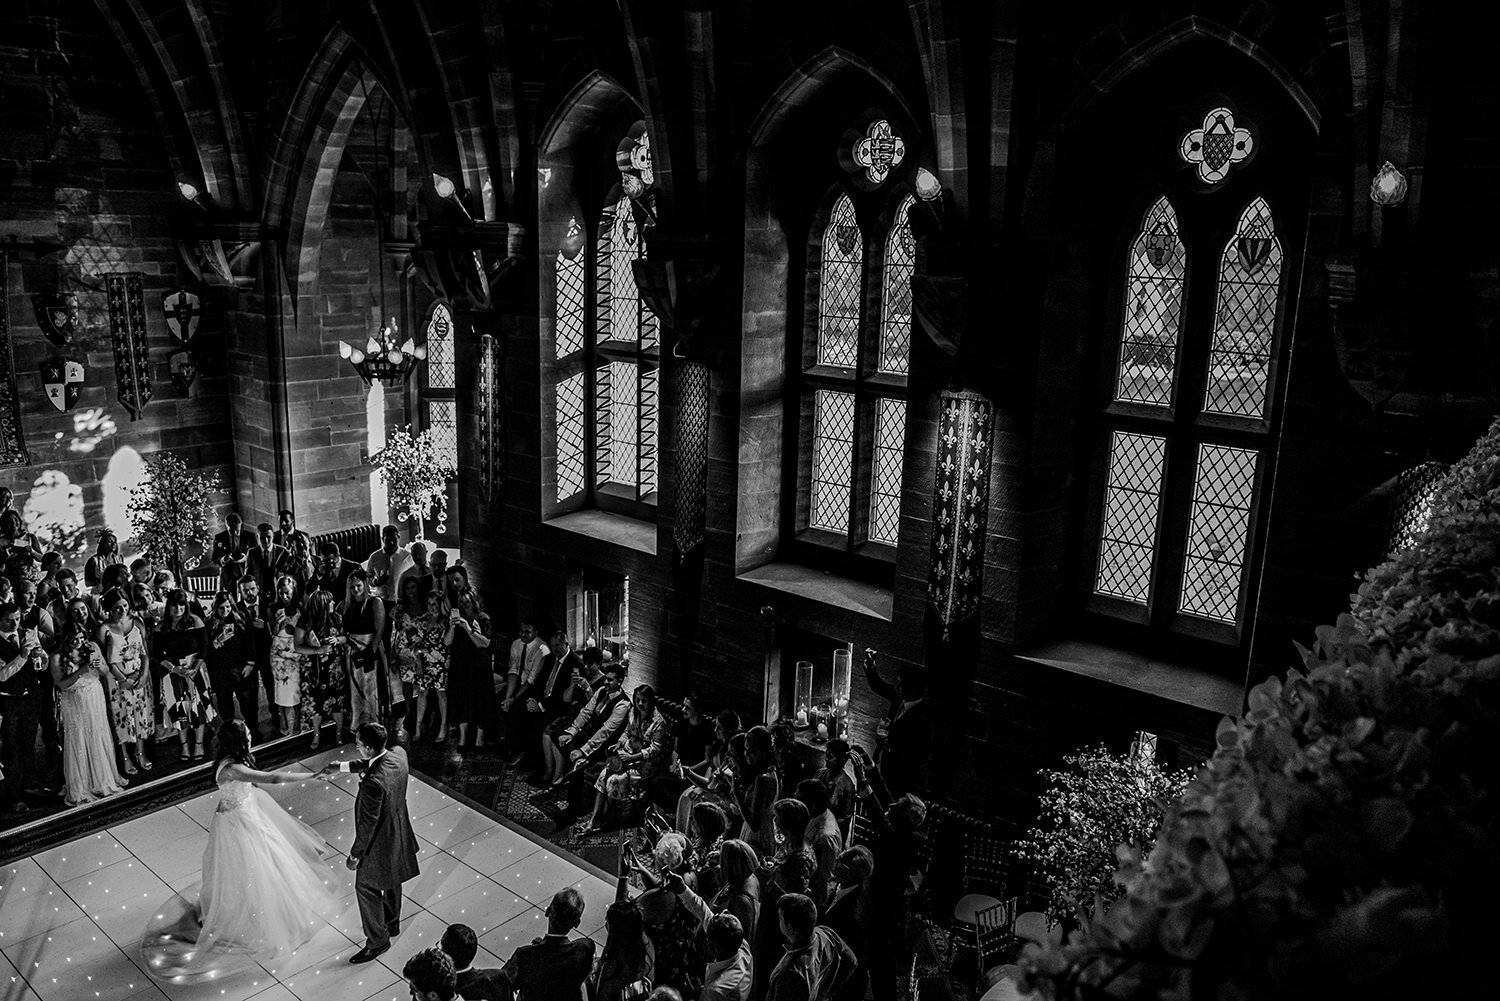  First dance in the great hall taken from above. 